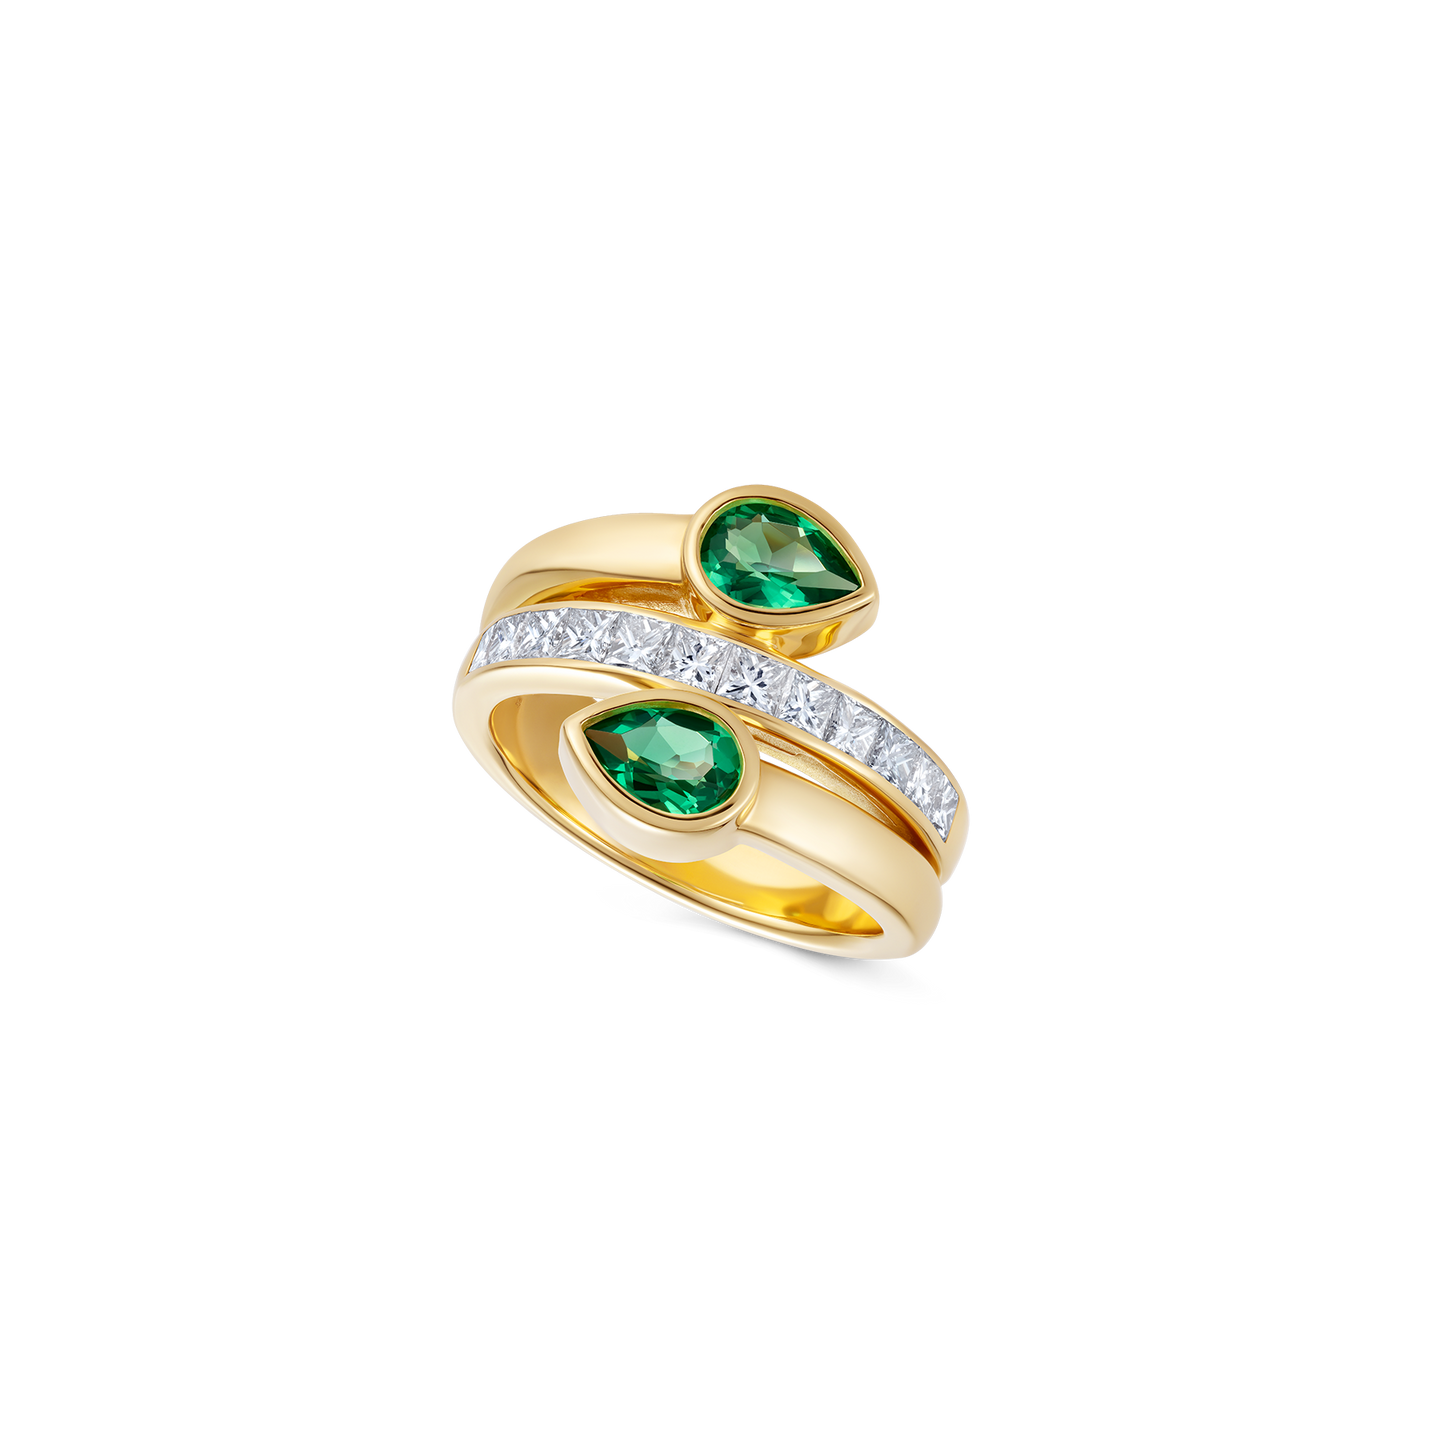 Le Cercle Serpent Emerald Double Ring